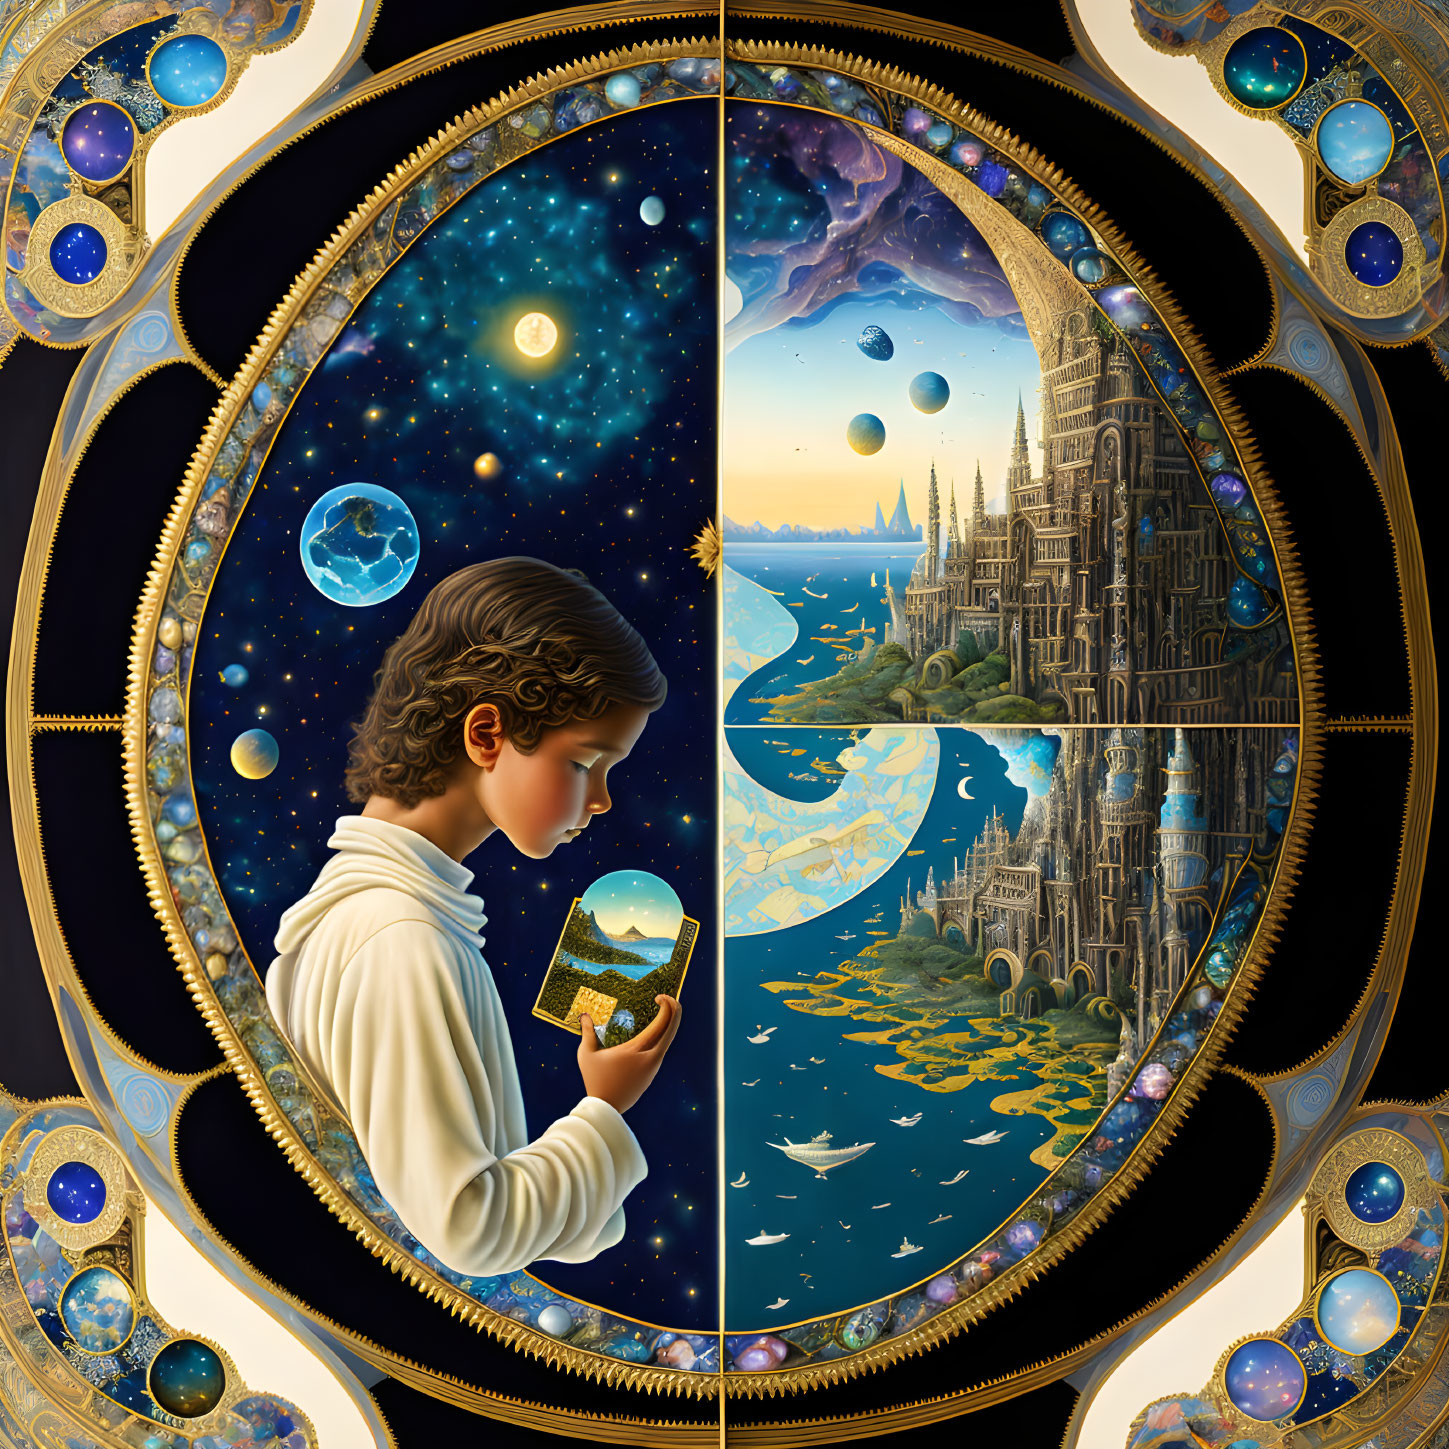 Split scene artwork featuring central figure holding galaxy book, cosmic and surreal earthscape.